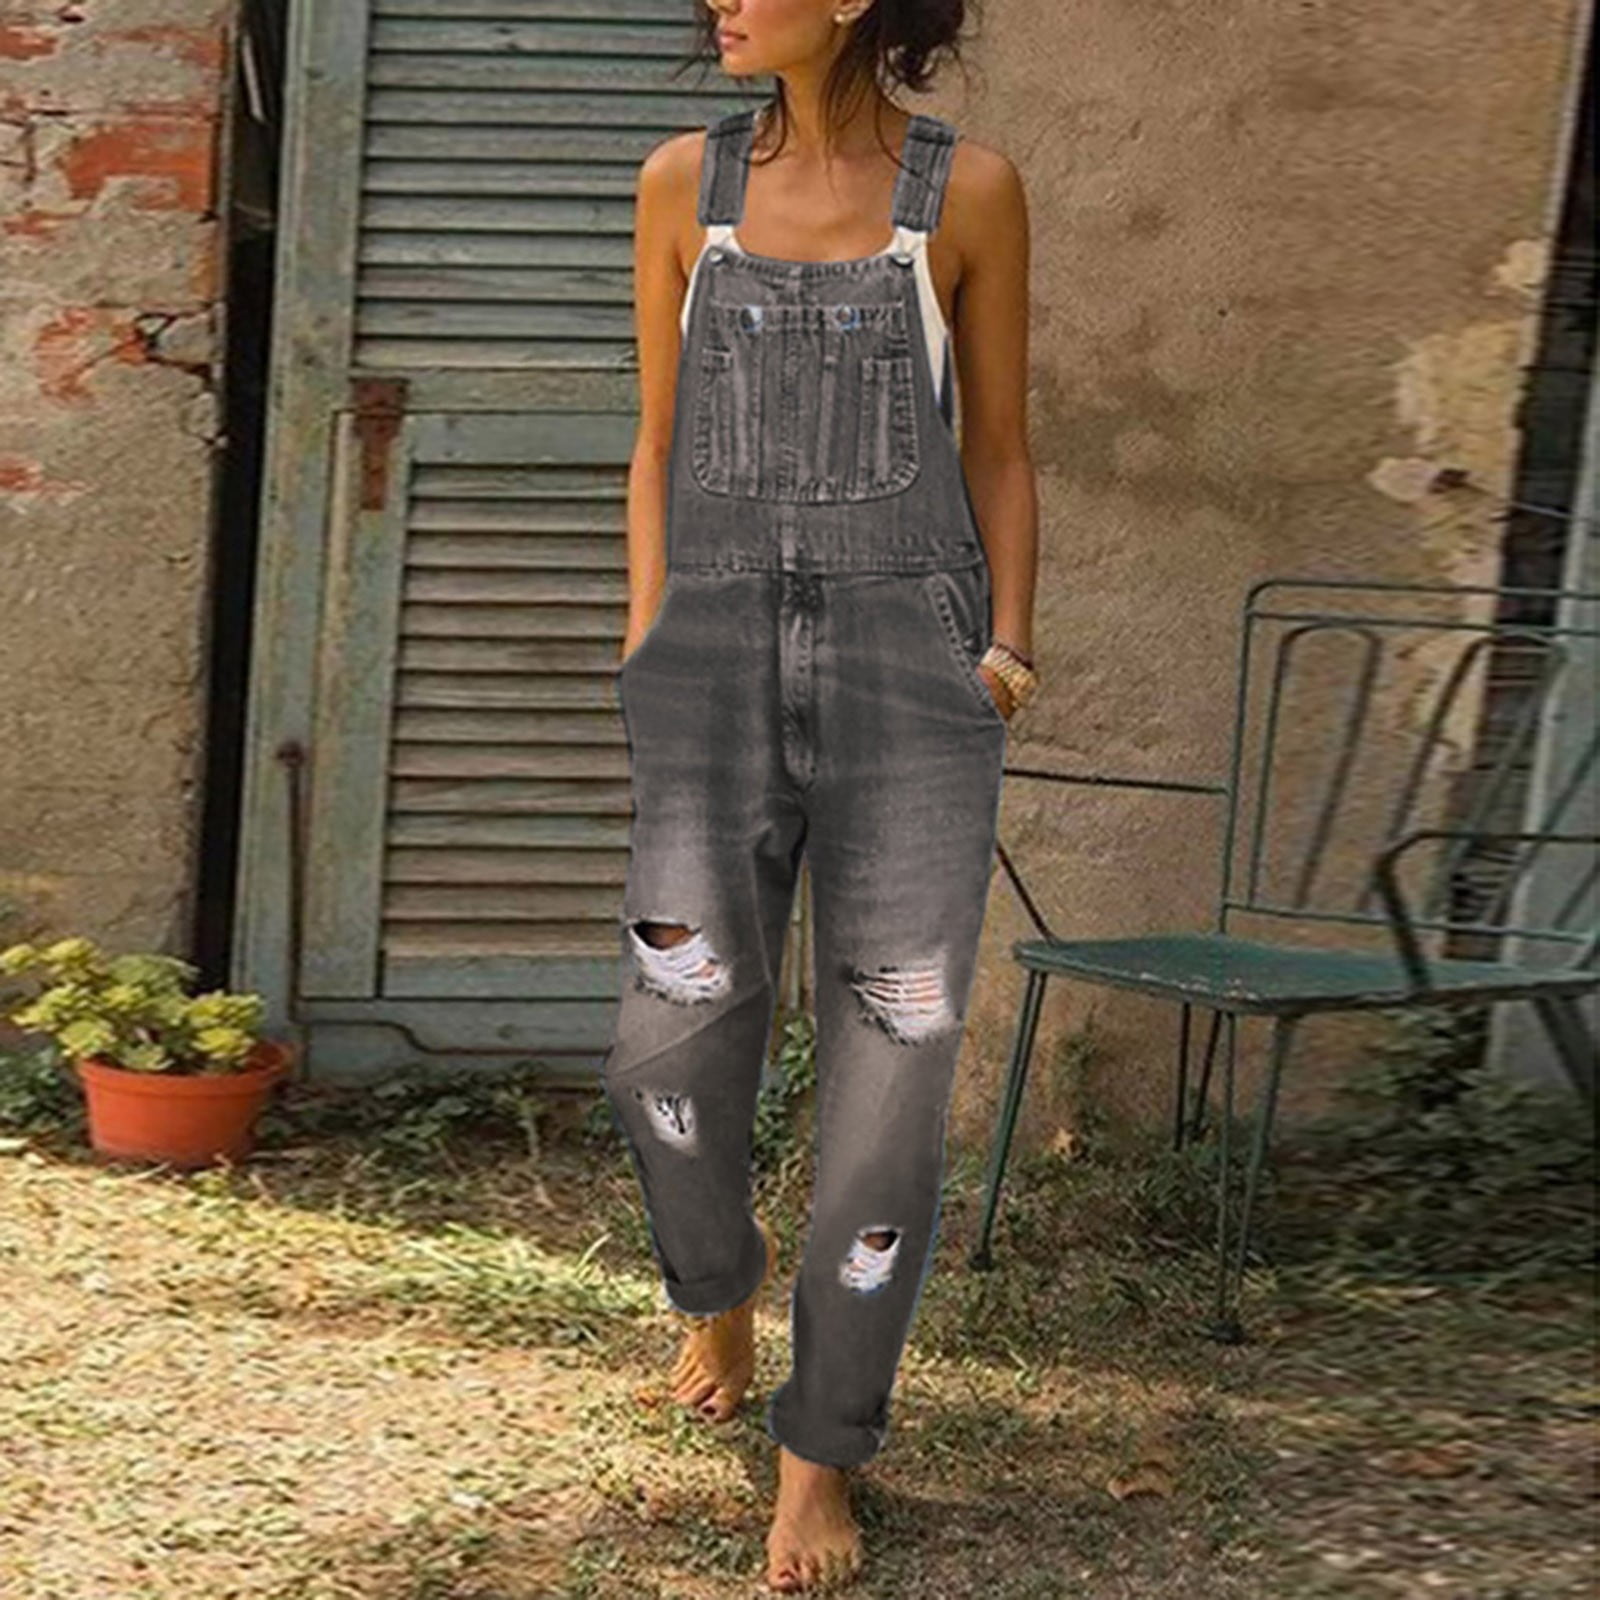 Groot Ronde transmissie TOWED22 Jumpsuits For Women,Jumpsuit for Women Rompers Summer Tank Top  Playsuit Sleeveless Overall Loose Fit Strappy Baggy Dungarees,Grey -  Walmart.com